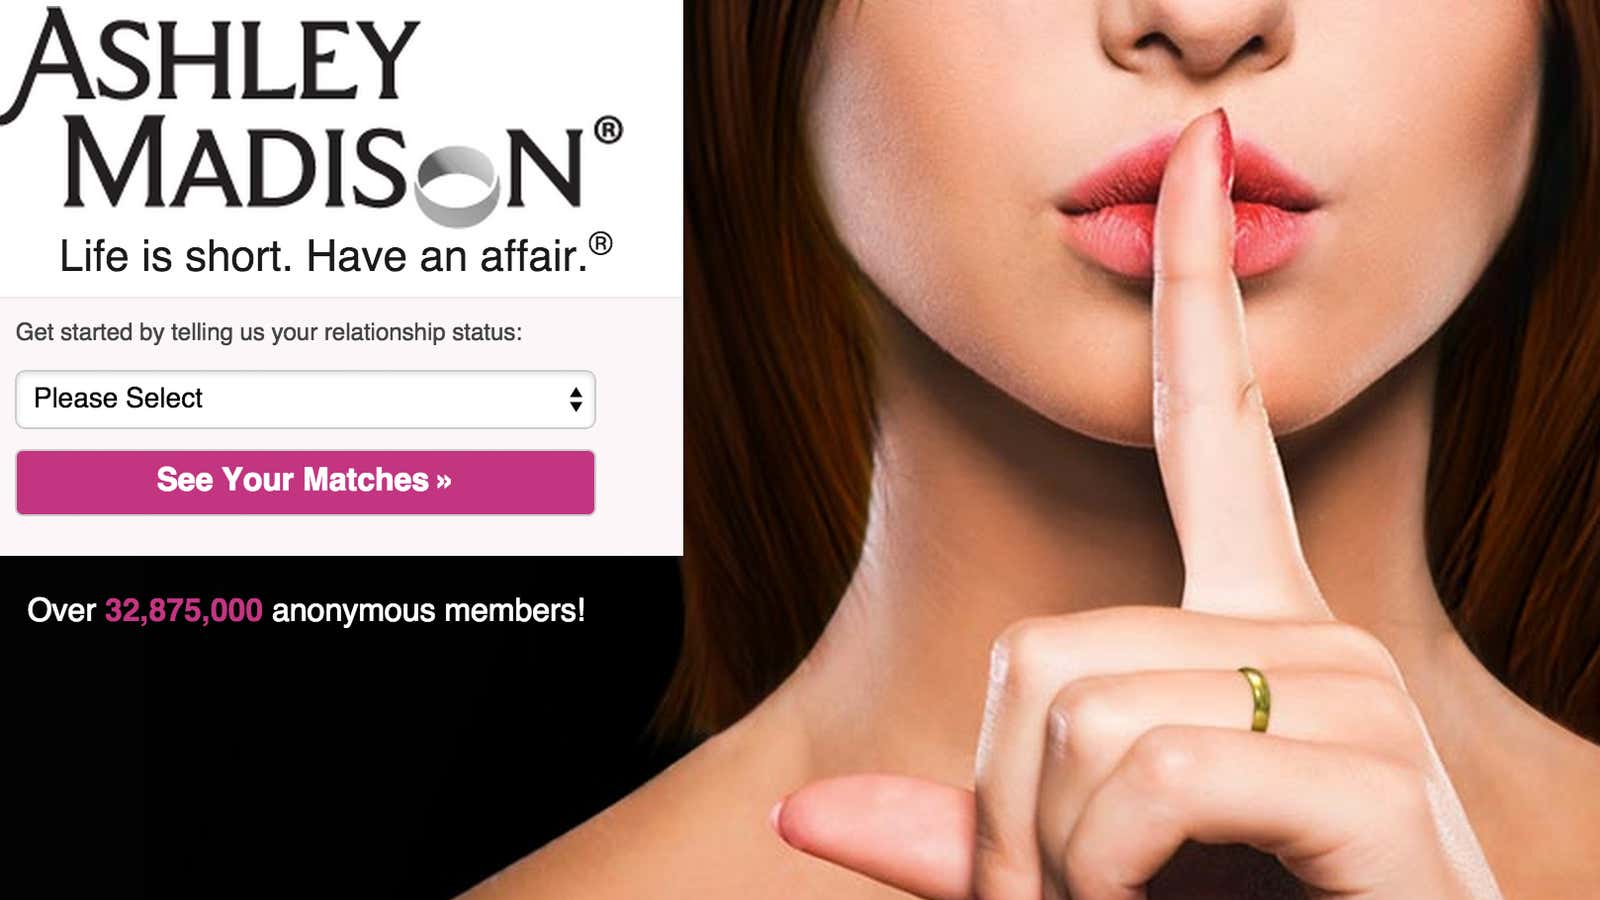 Ashley Madison’s welcome screen.